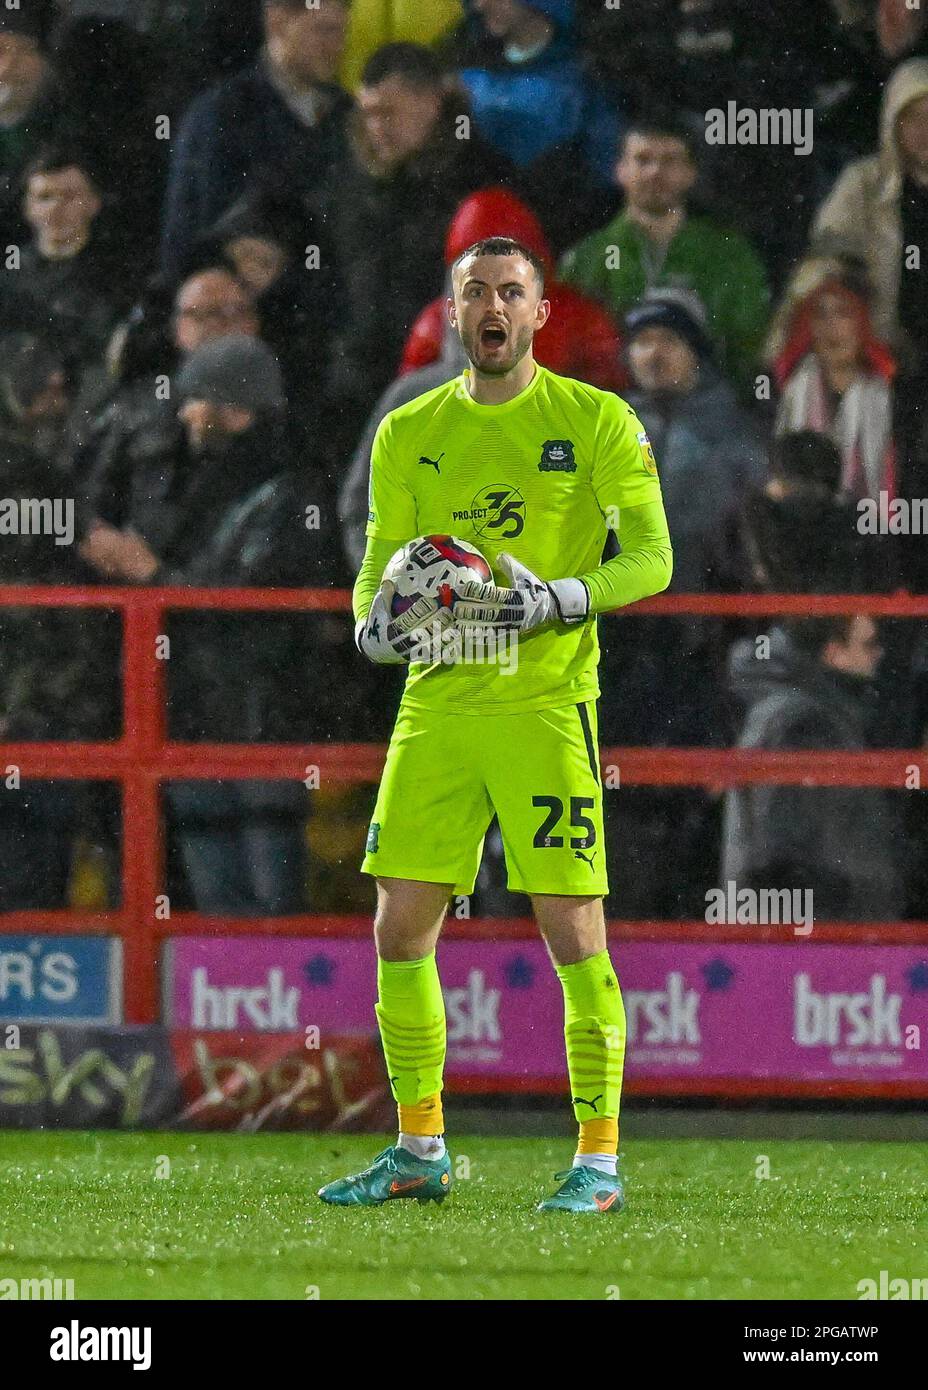 Callum Burton  #25 of Plymouth Argyle  makes a save during the Sky Bet League 1 match Accrington Stanley vs Plymouth Argyle at Wham Stadium, Accrington, United Kingdom, 21st March 2023  (Photo by Stan Kasala/News Images) Stock Photo